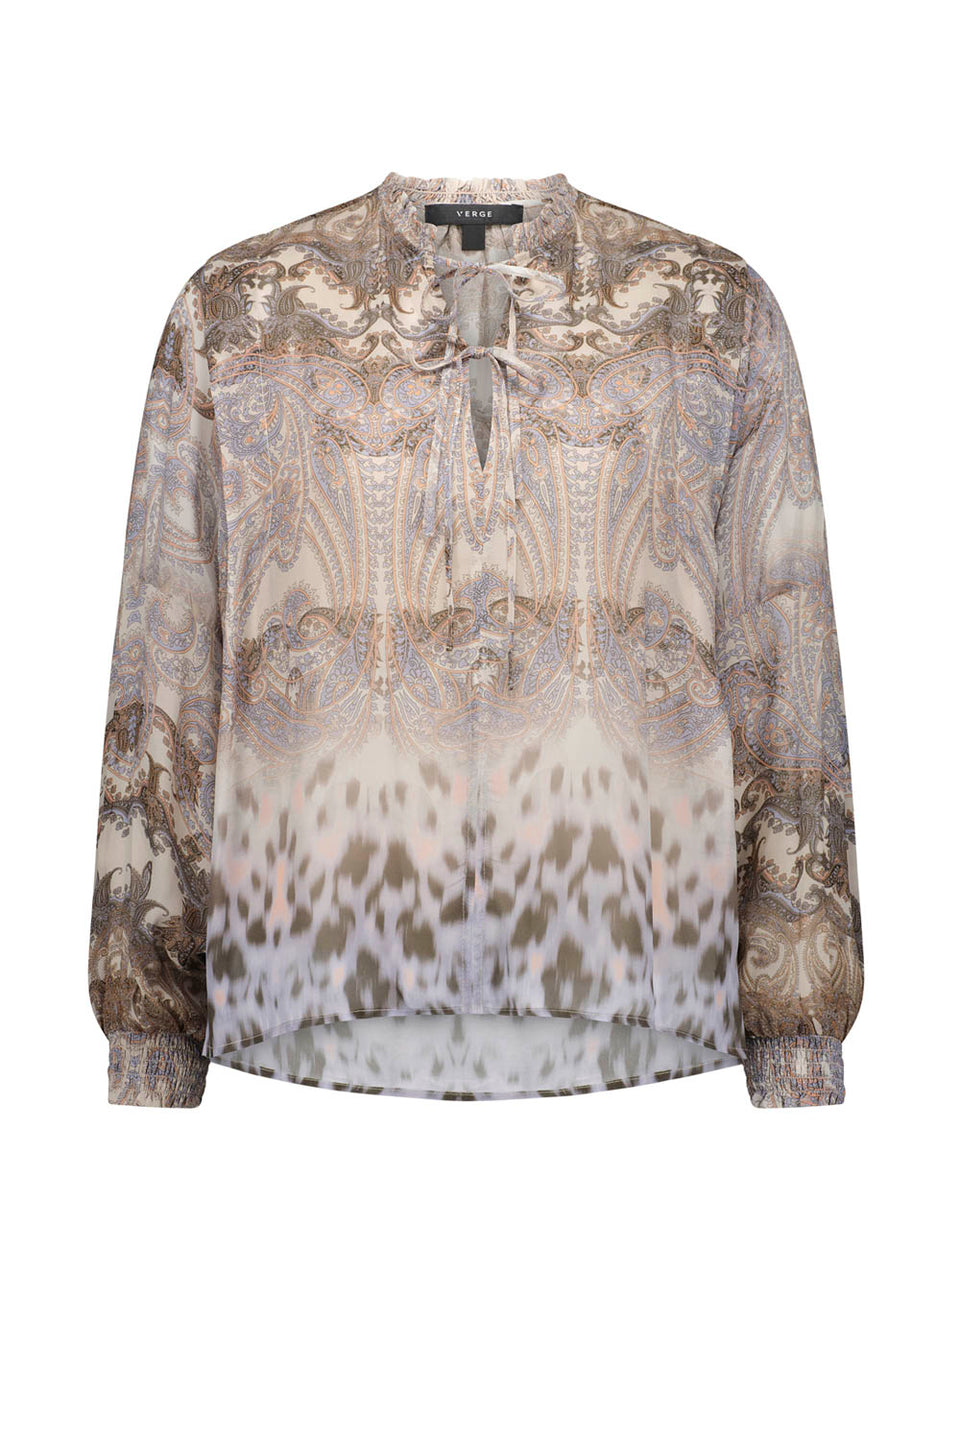 VERGE WIX BLOUSE - PRINT - THE VOGUE STORE